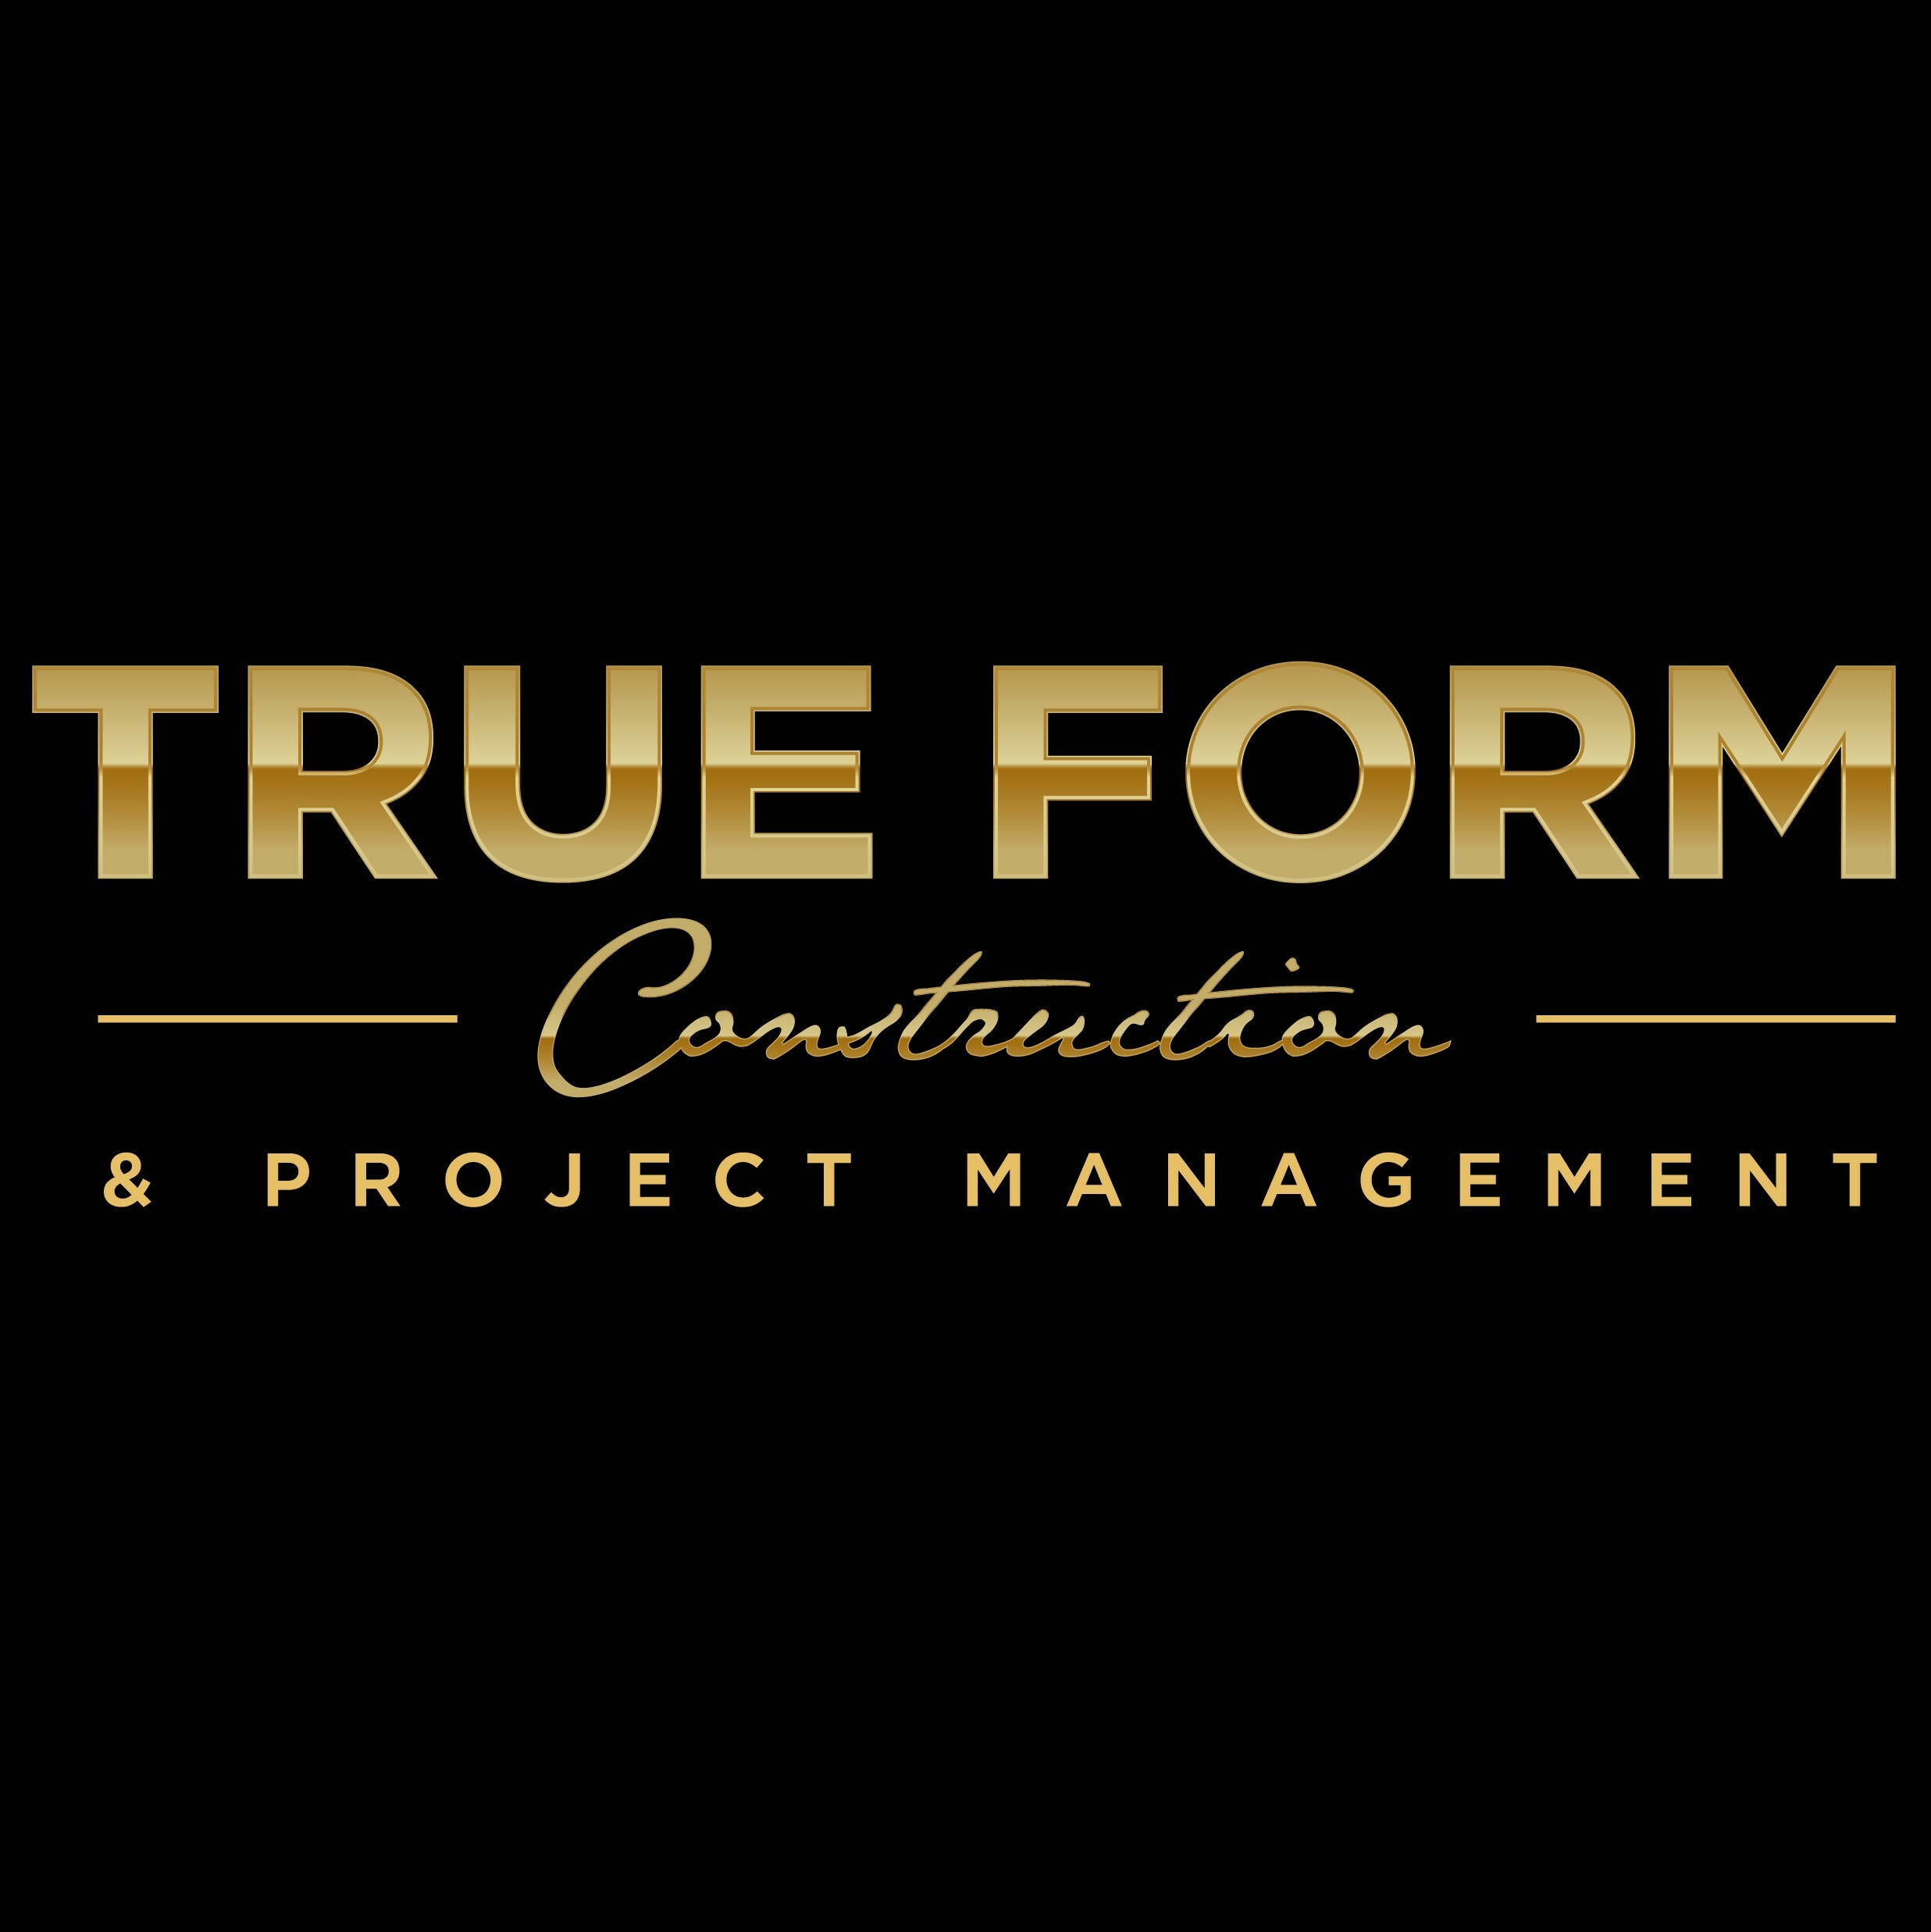 True Form Construction and Project Management's logo